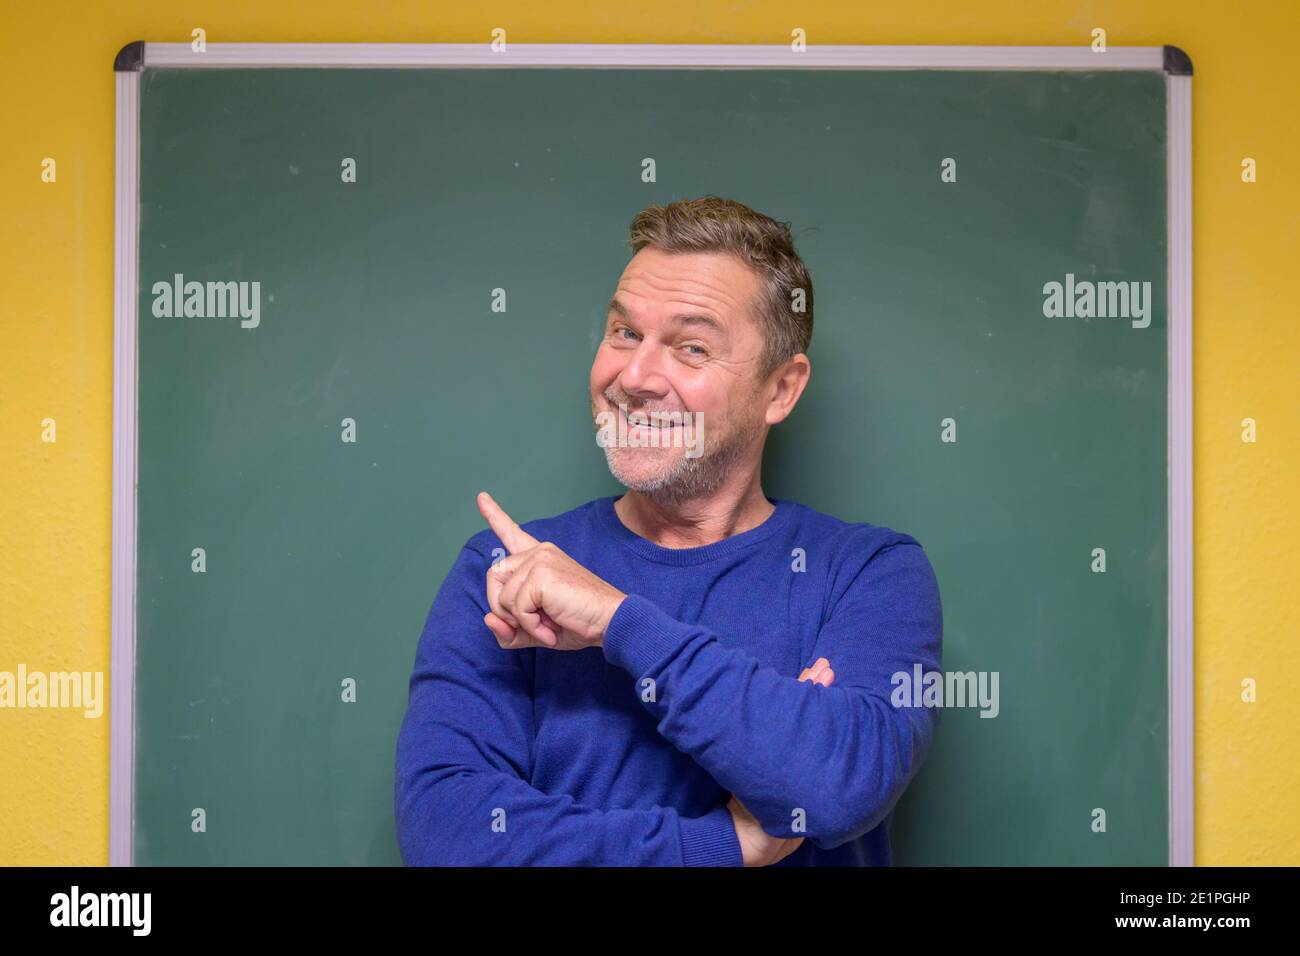 Male teacher pointing to the chalkboard behind him with a beaming smile and look of anticipation as he face s the camera Stock Photo